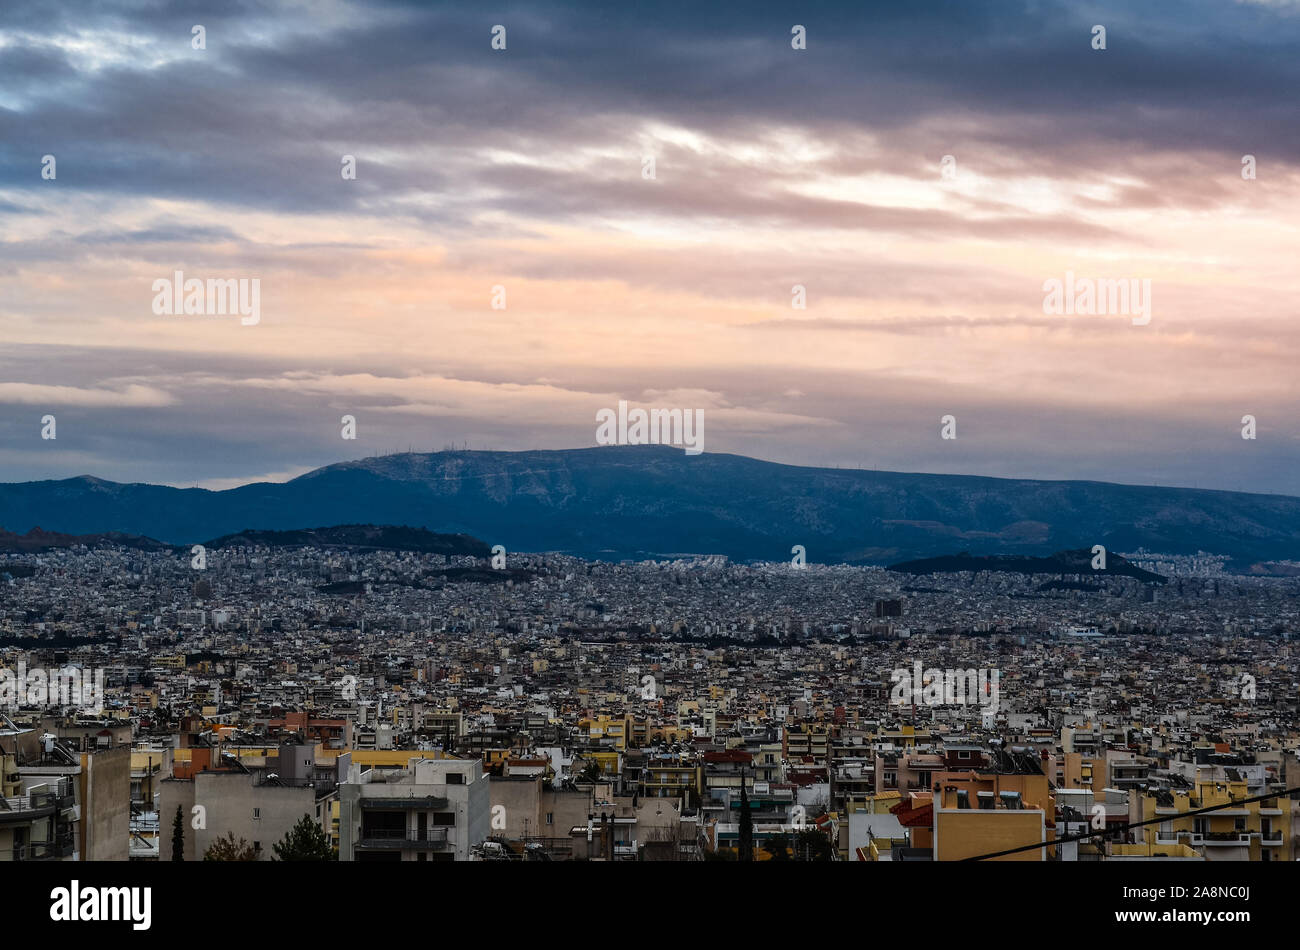 Amazing aerial view over Athens city, Greece during winter season at sunset. Stock Photo